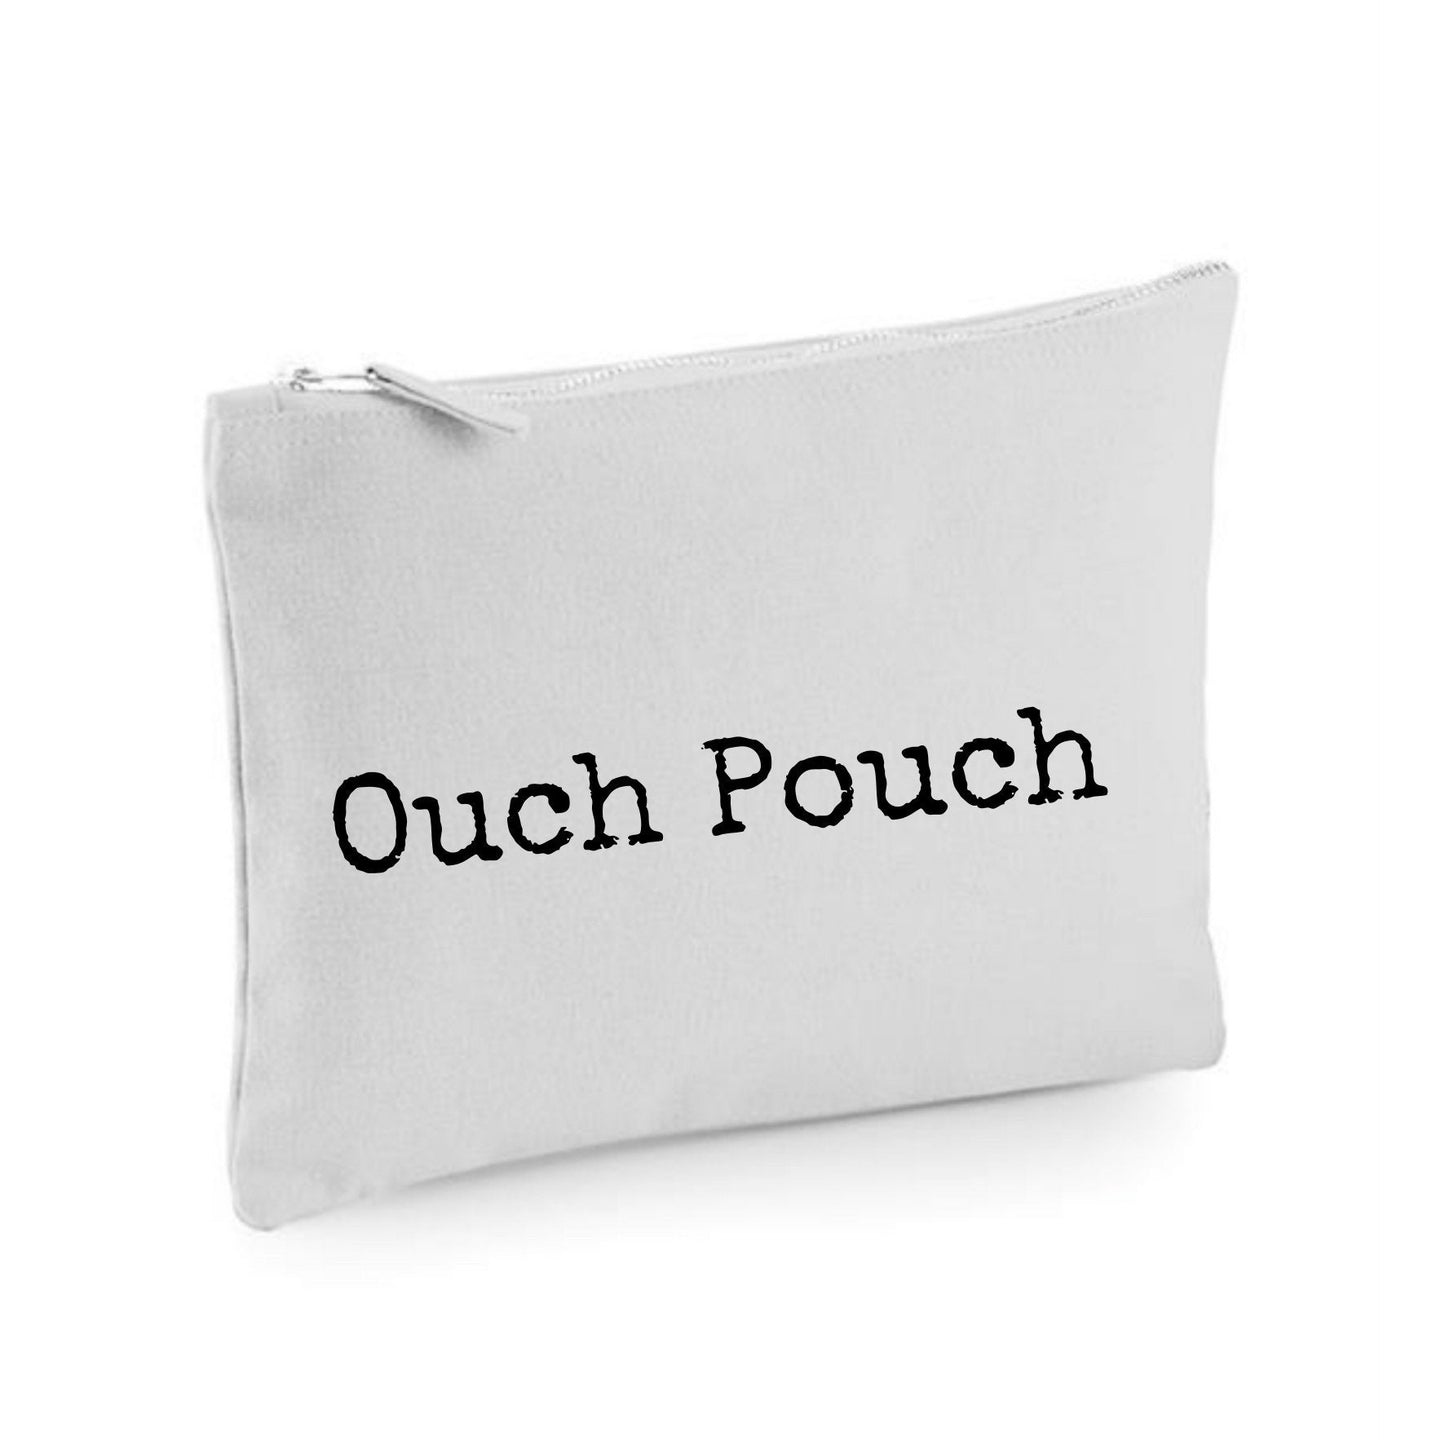 Ouch pouch, diabetes medicines case, insulin pouch, type 1 diabetes meds bag, diabetes essentials bag